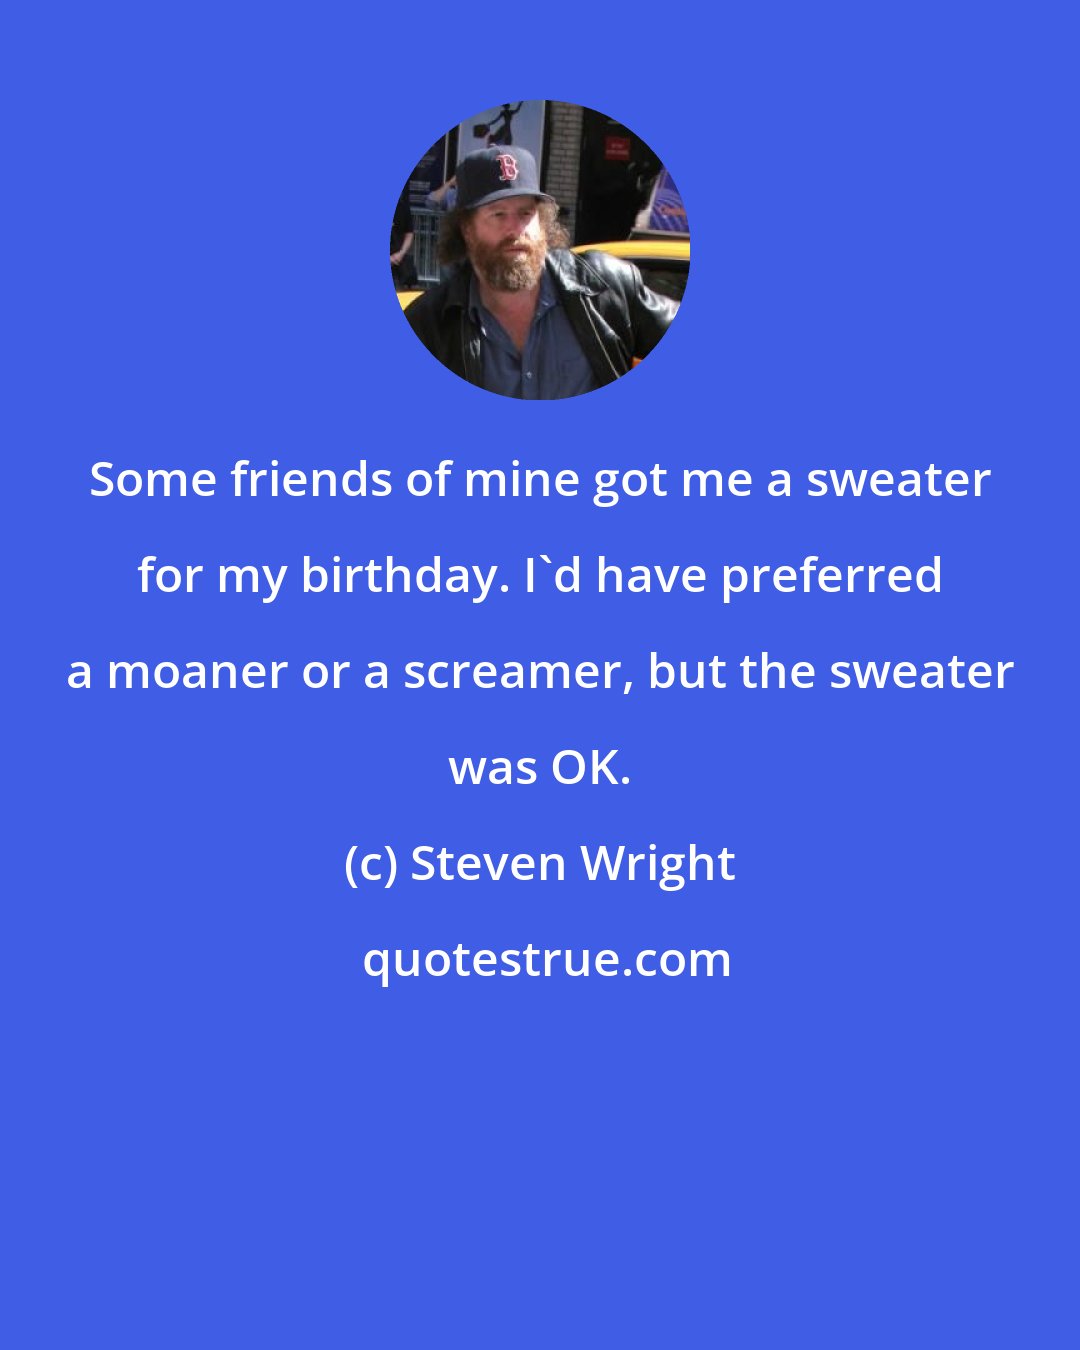 Steven Wright: Some friends of mine got me a sweater for my birthday. I'd have preferred a moaner or a screamer, but the sweater was OK.